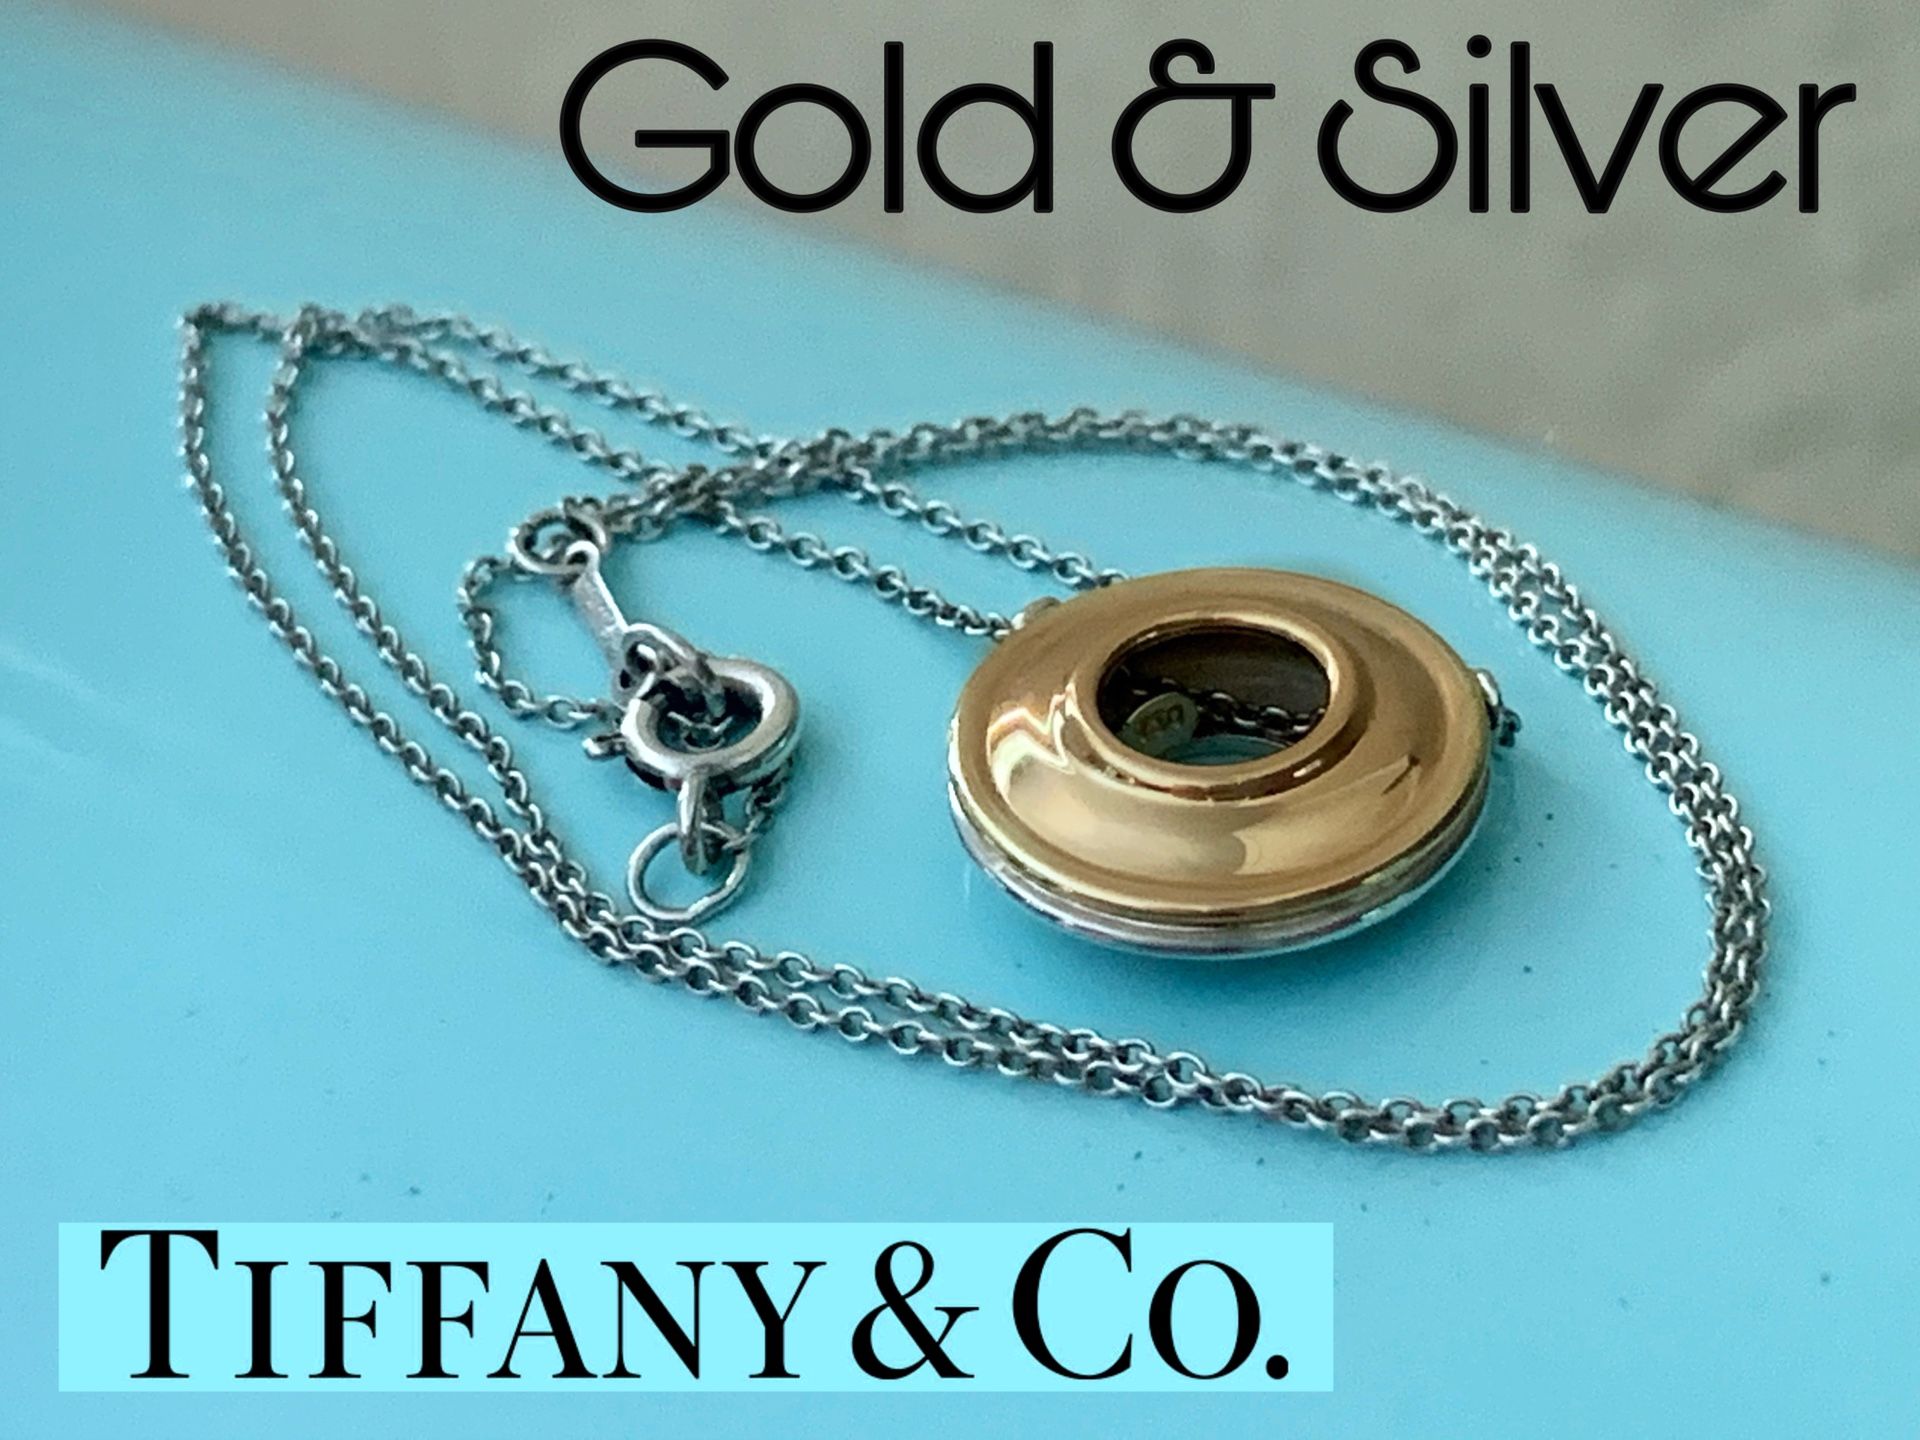 BEST OFFER New Tiffany & Co. gold and silver necklace/pendant Paloma Picasso